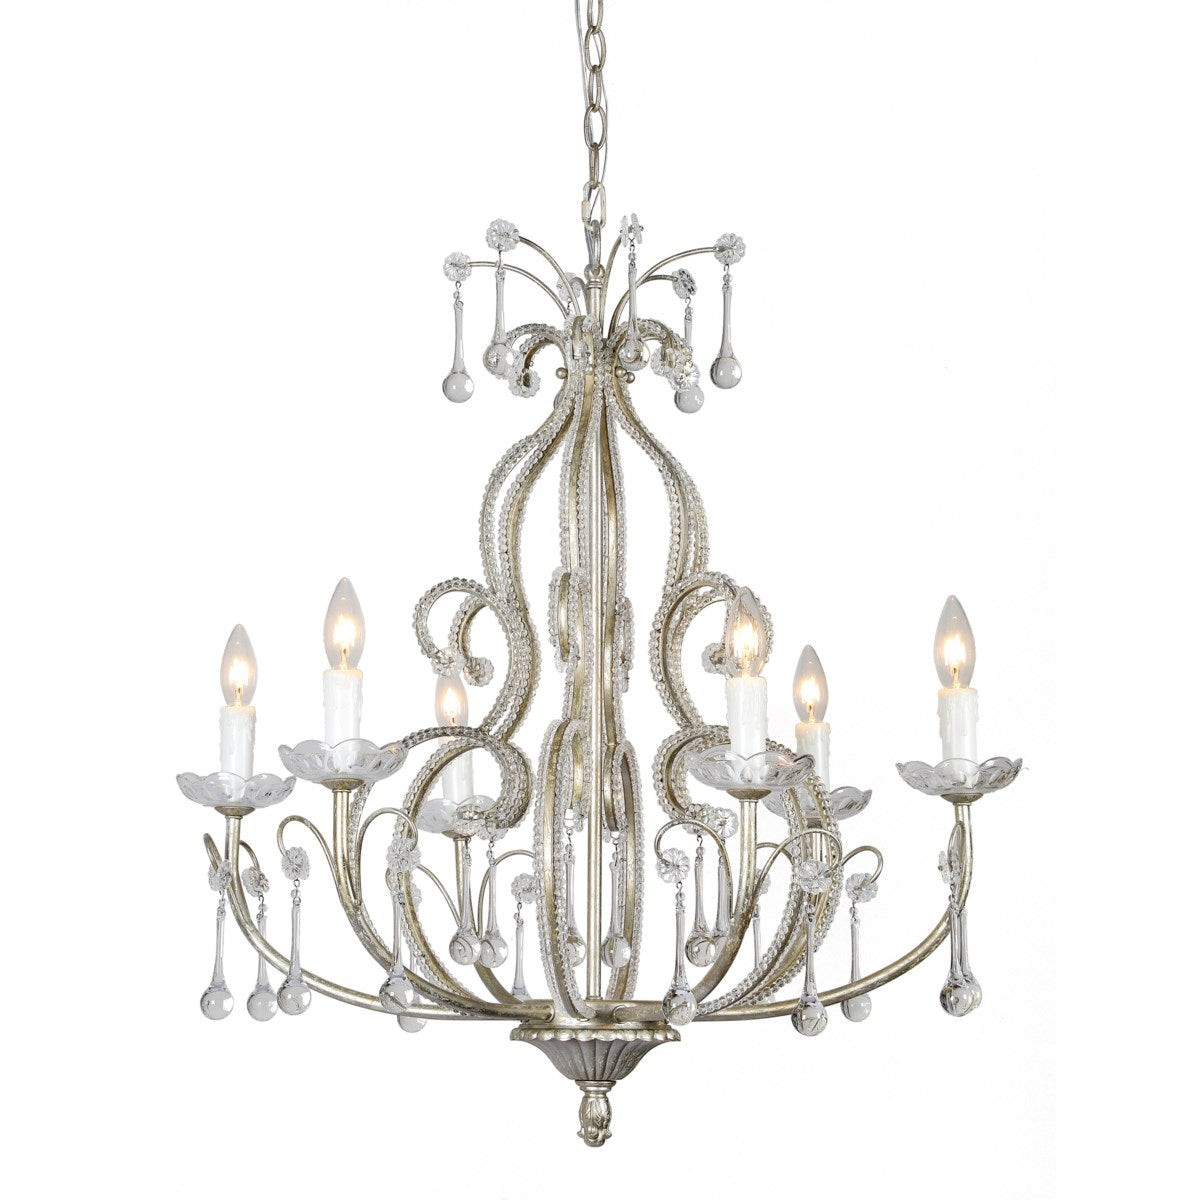 Forty West Designs 70303 Riverlight Shabby Chic Beaded Chandelier by Rachel Ashwell